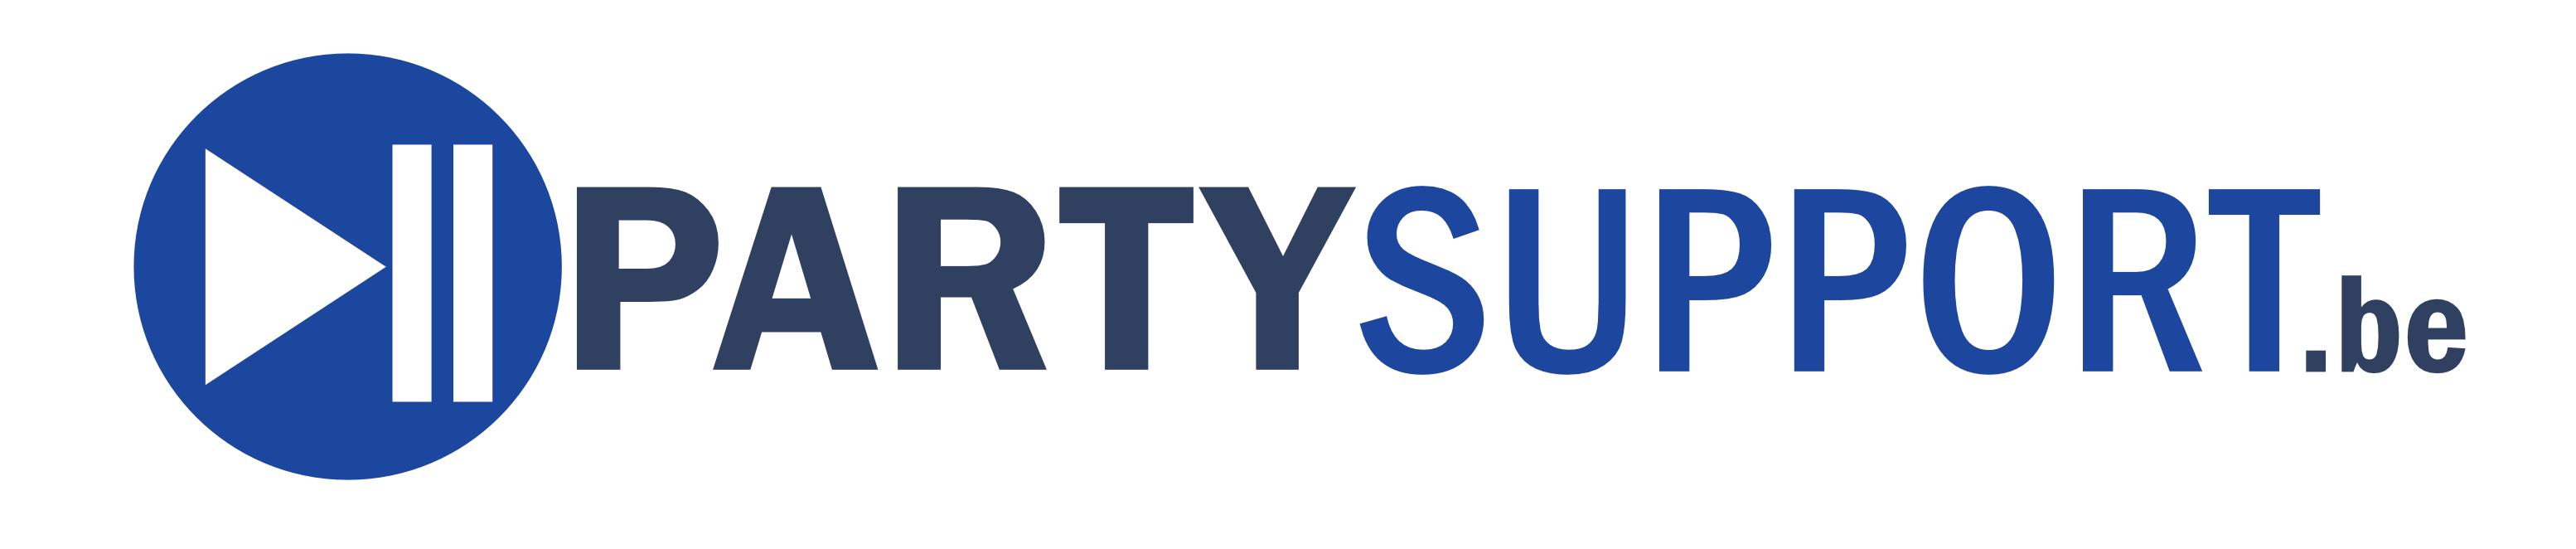 PartySupport.be